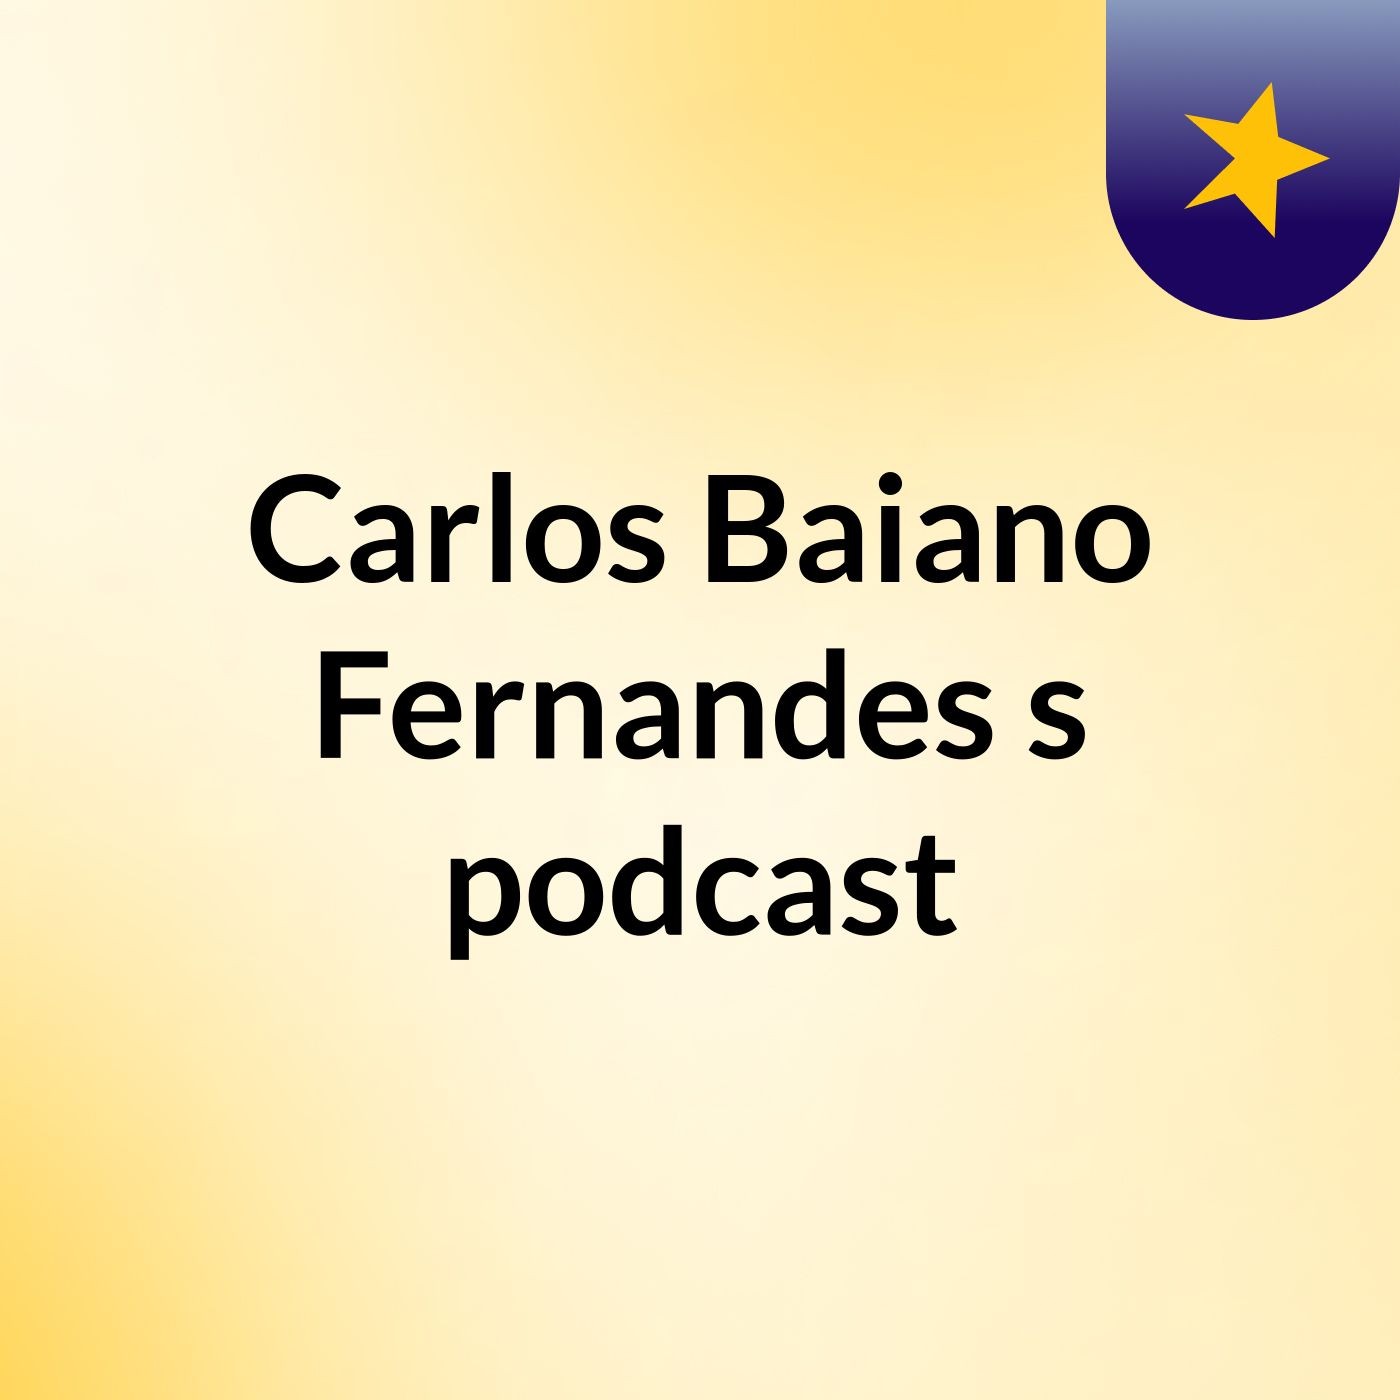 Carlos Baiano Fernandes's podcast